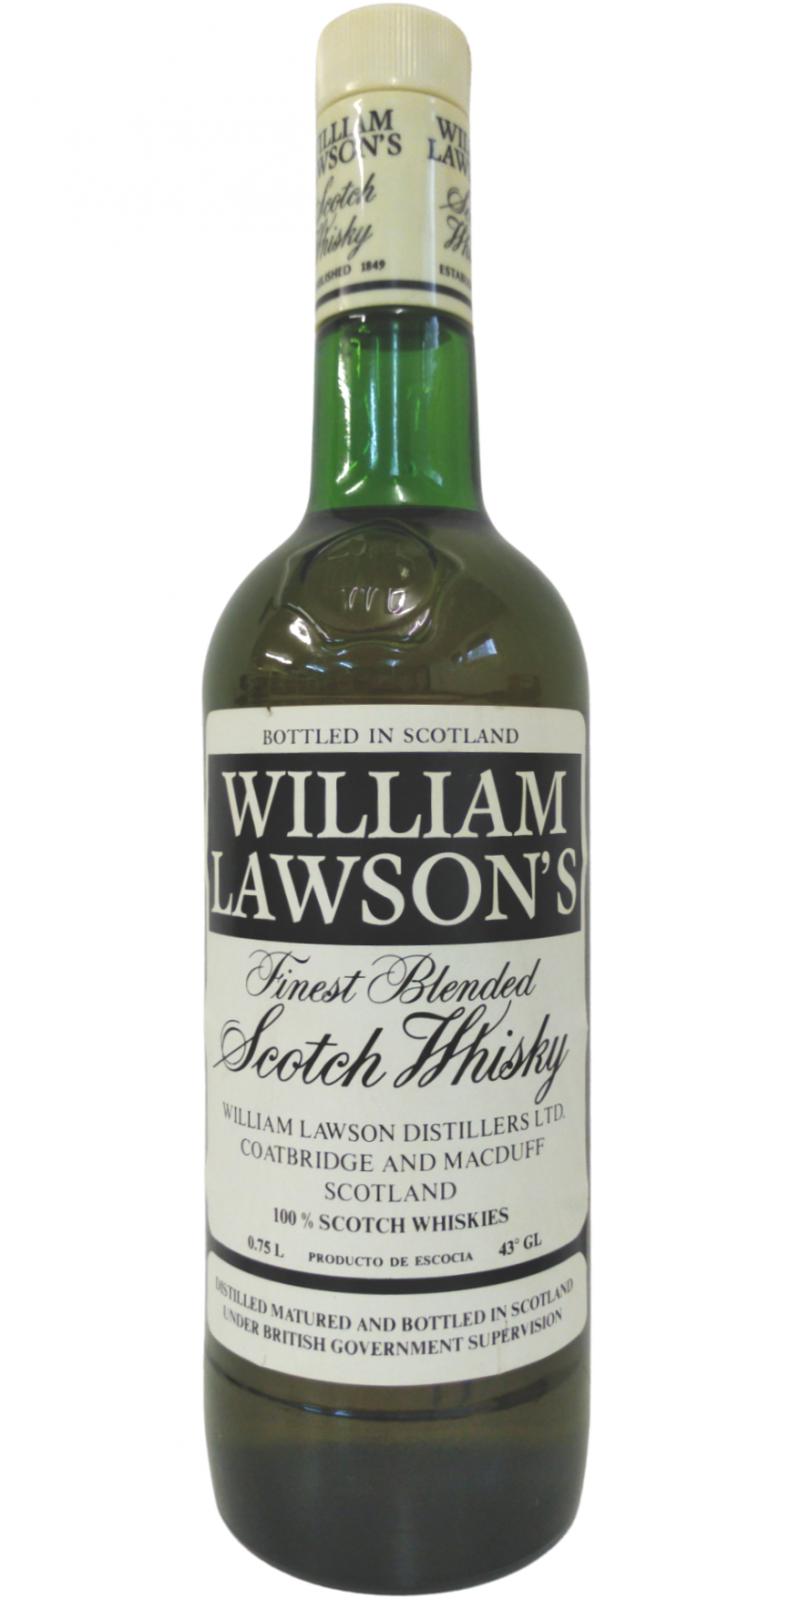 William Lawson's 12yo Finest Blended Scotch Whisky Martino & Rossi S.A. Barcelona 43% 750ml